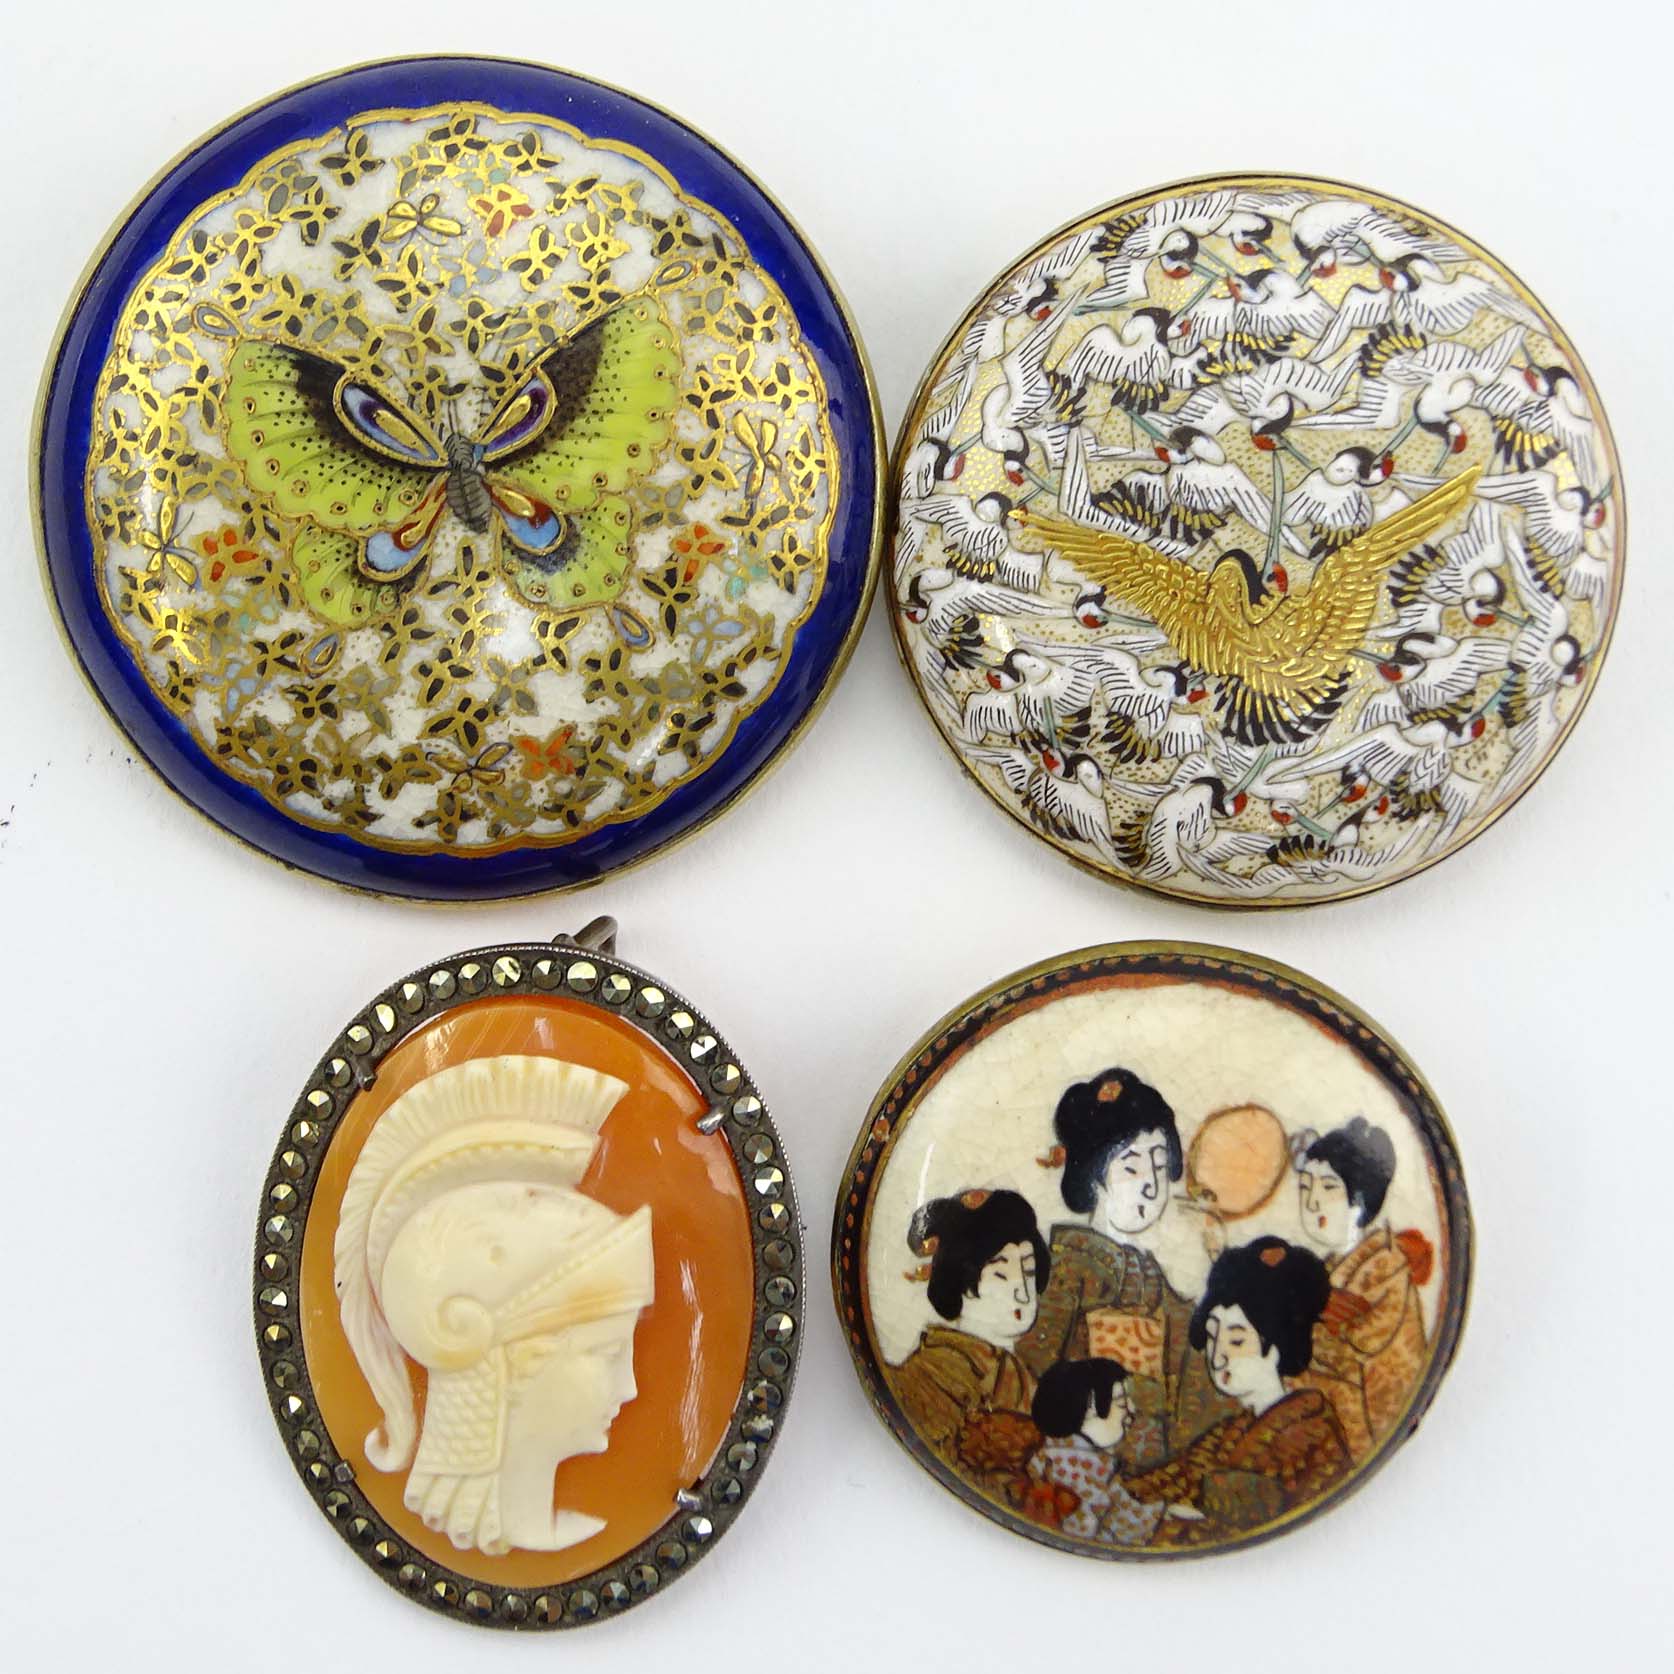 Collection of Three (3) Japanese Satsuma Porcelain Brooches together with One (1) Carved Shell Cameo Pendant Brooch.